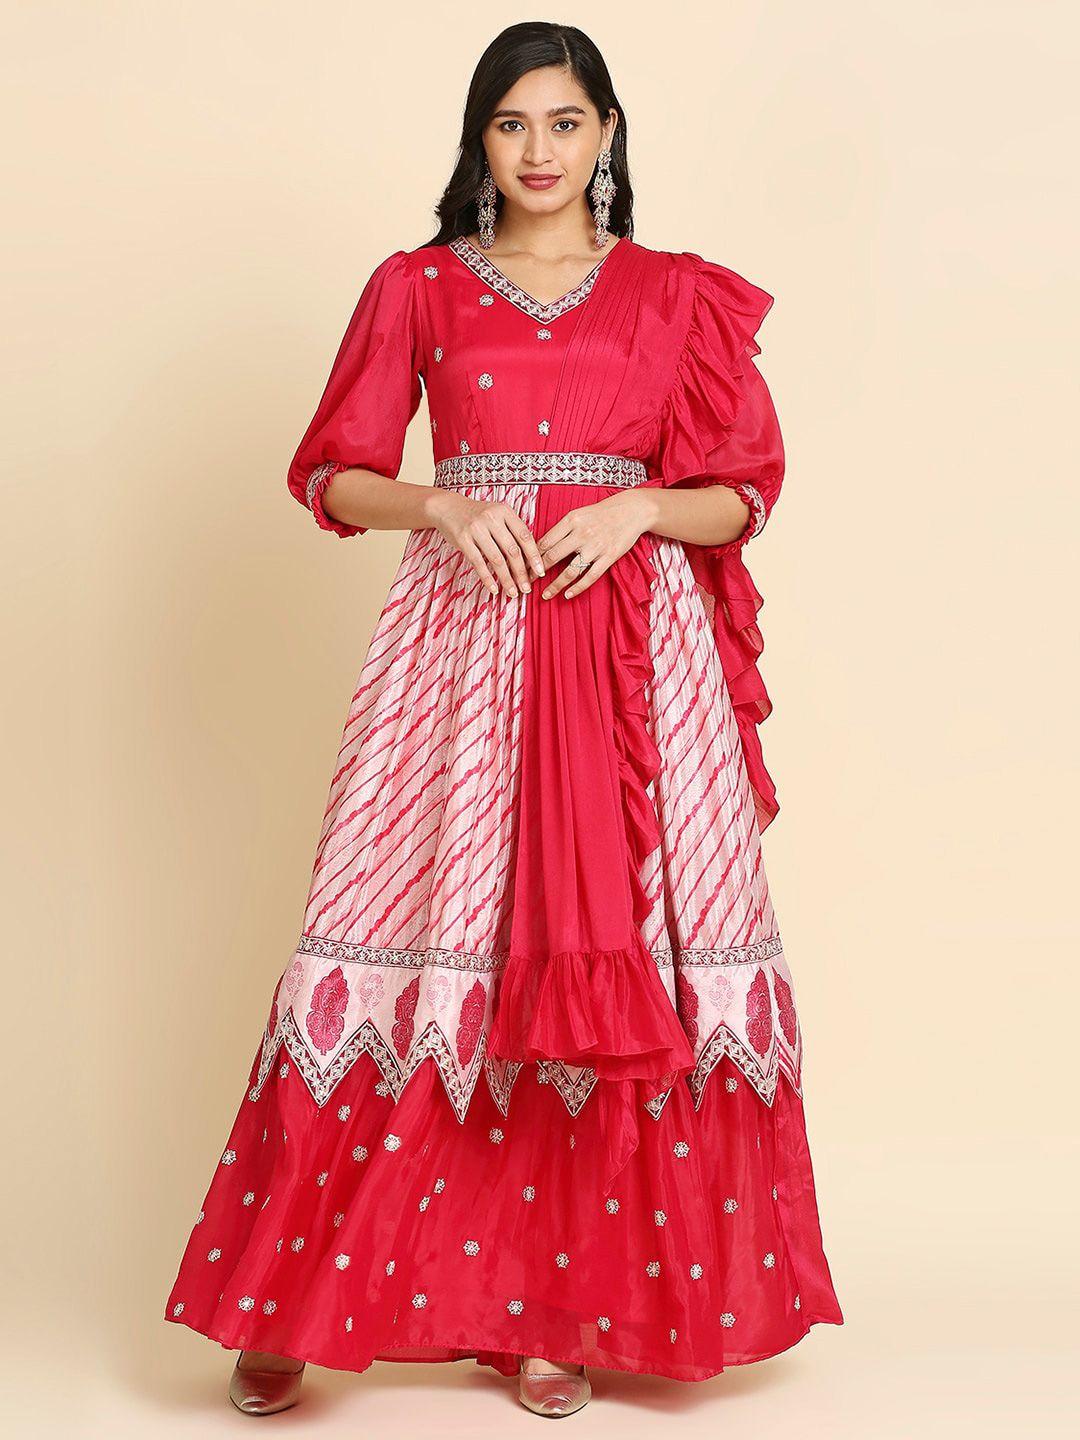 madhuram-tie-and-dye-embroidered-chiffon-maxi-ethnic-dress-with-belt